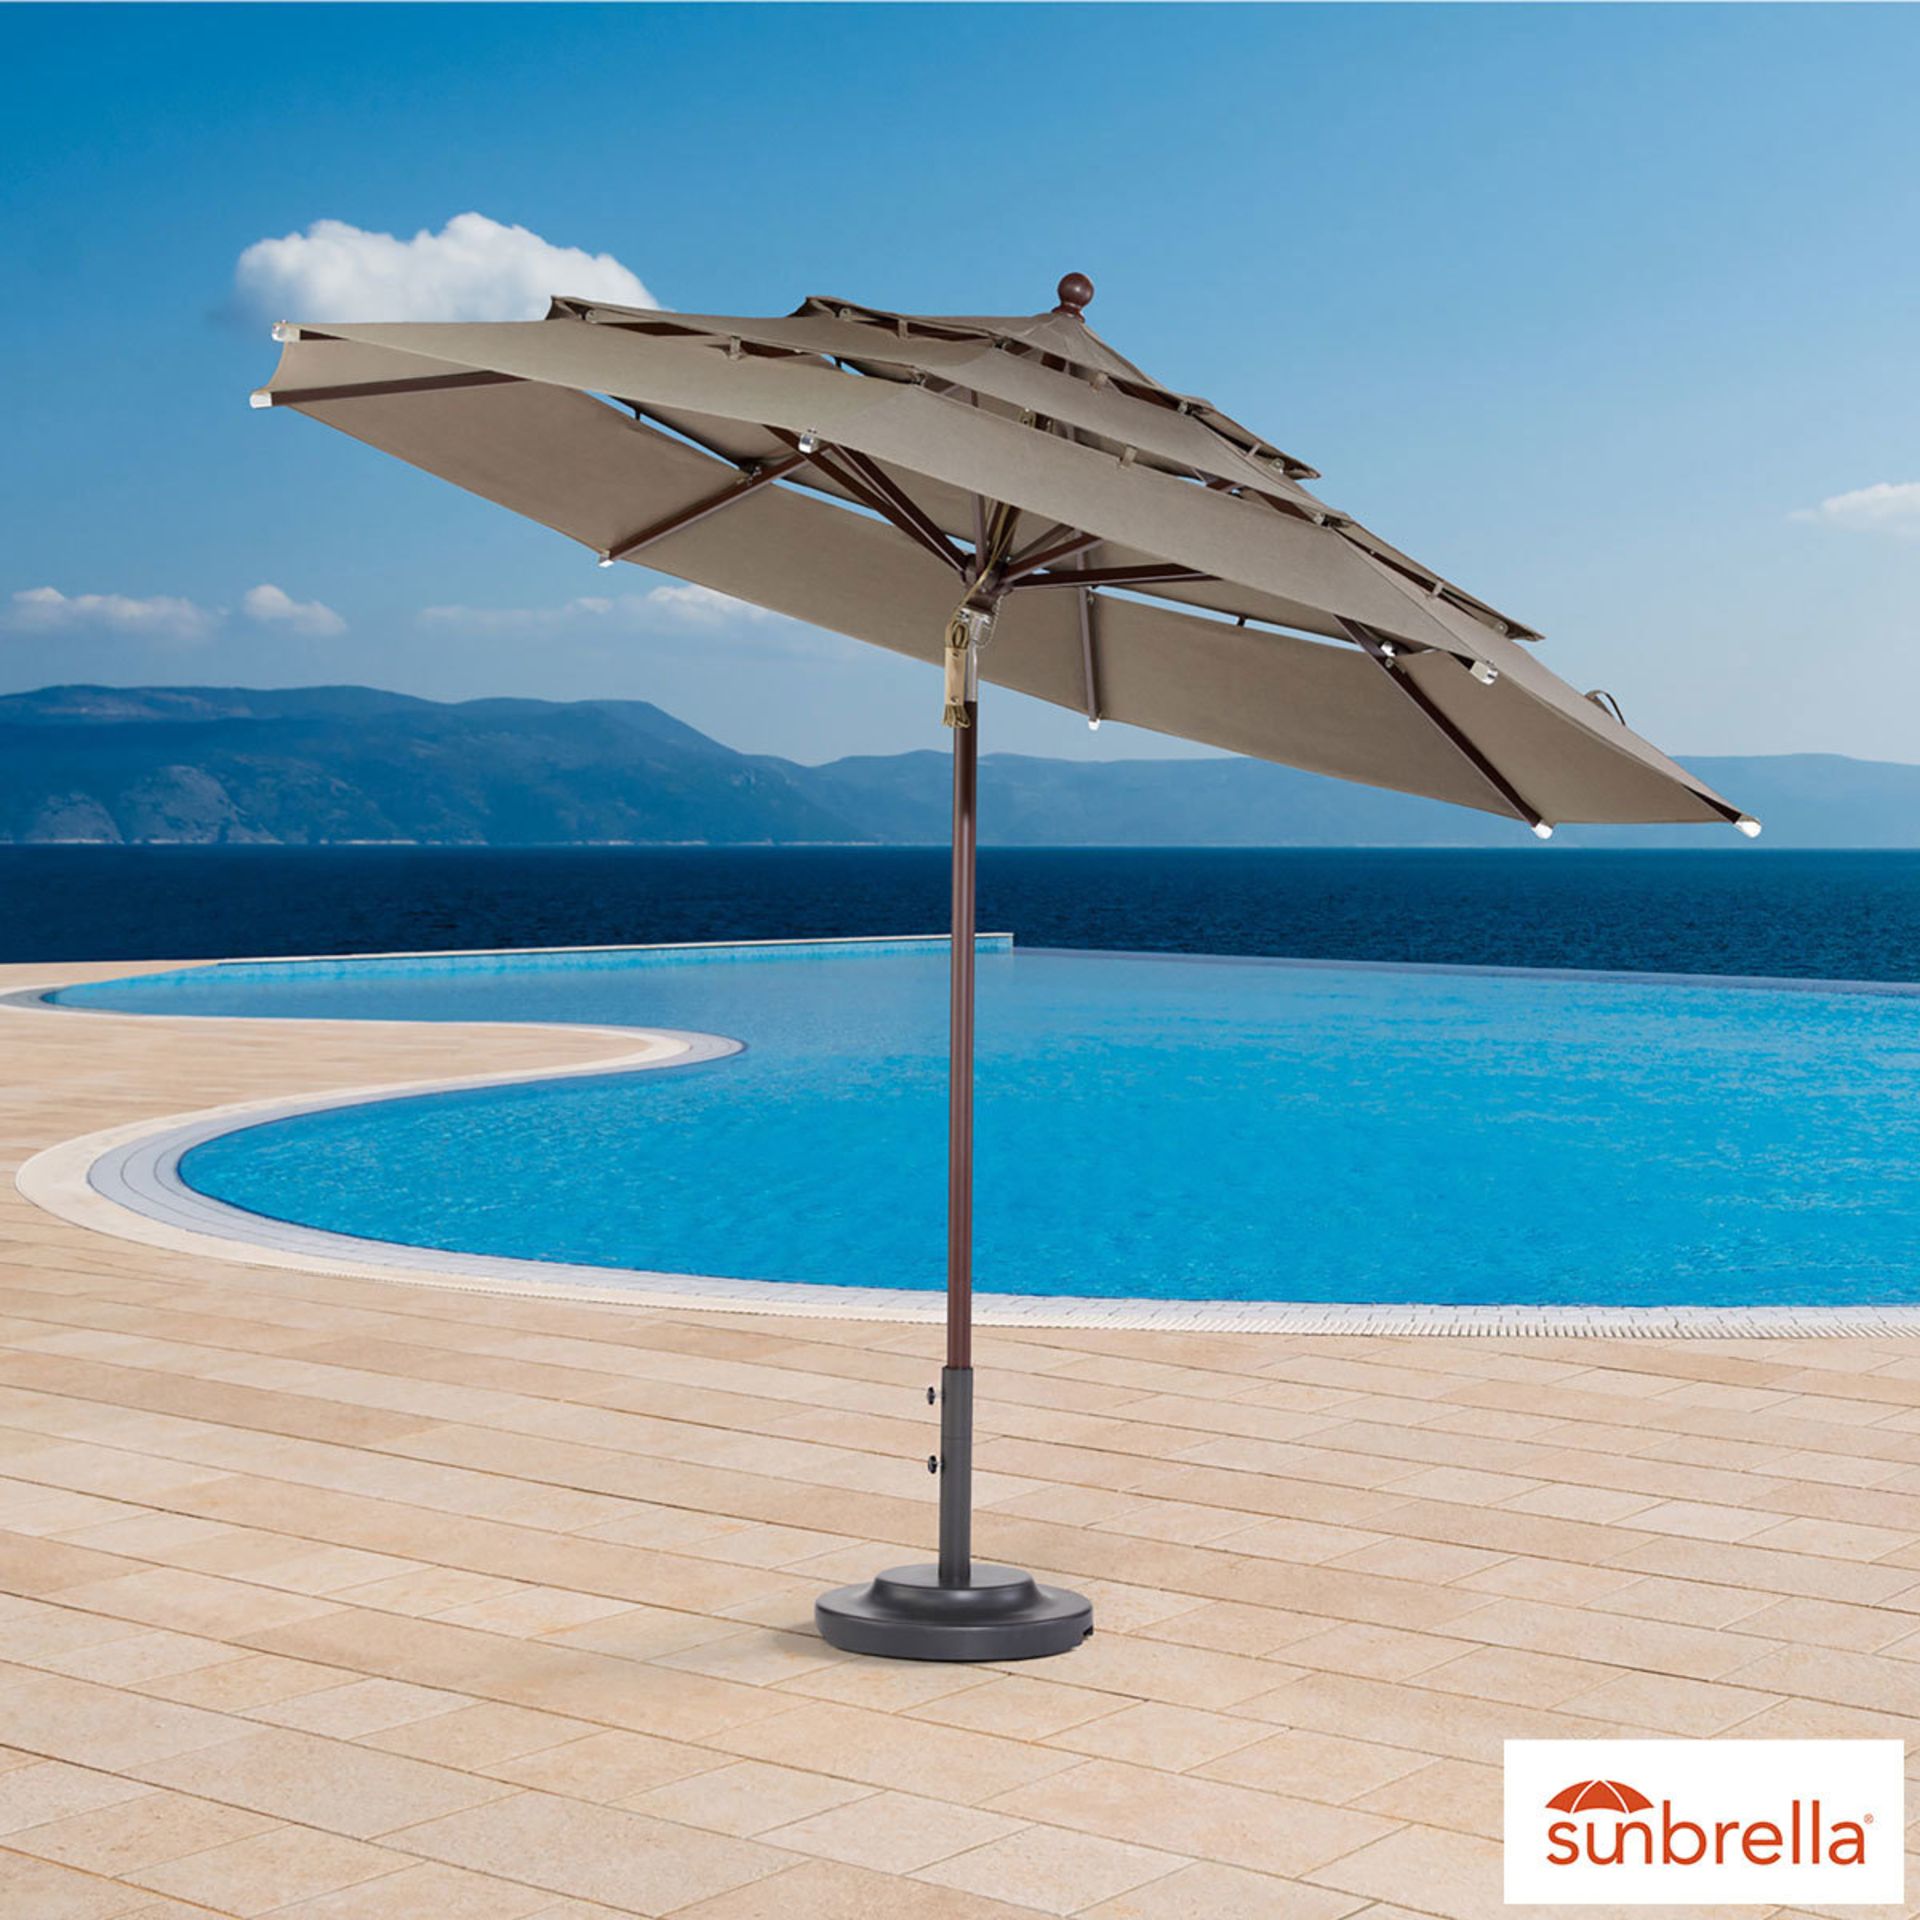 1 ACTIVA PROSHADE 11FT (3.3M) BEIGE UMBRELLA RRP Â£299 (PICTURES FOR ILLUSTRATION PURPOSES ONLY)